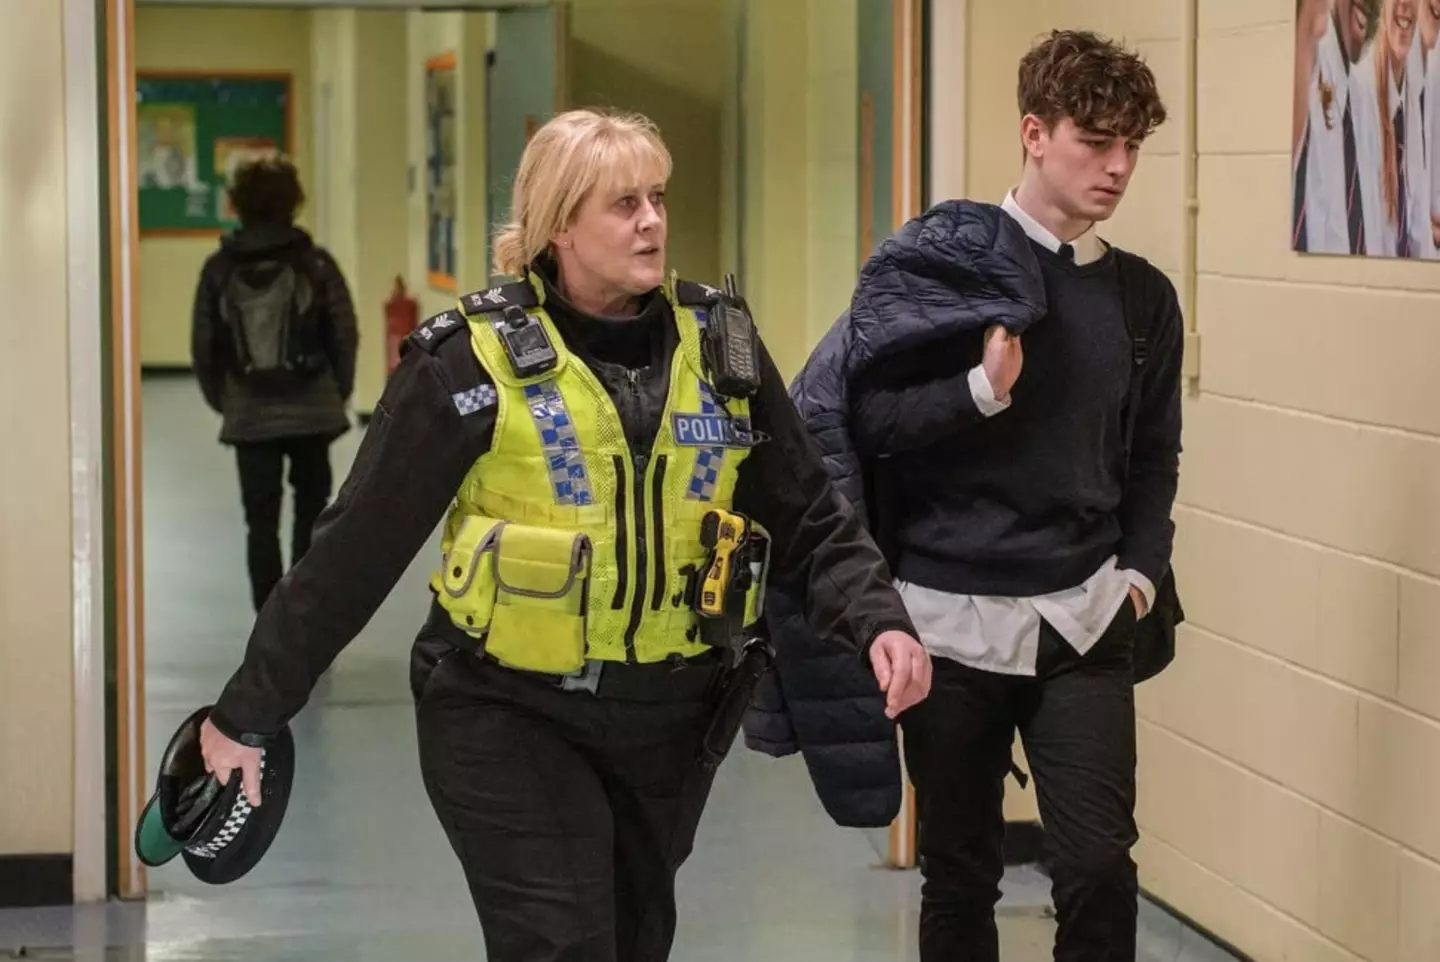 The Happy Valley finale aired last night and it didn't disappoint.